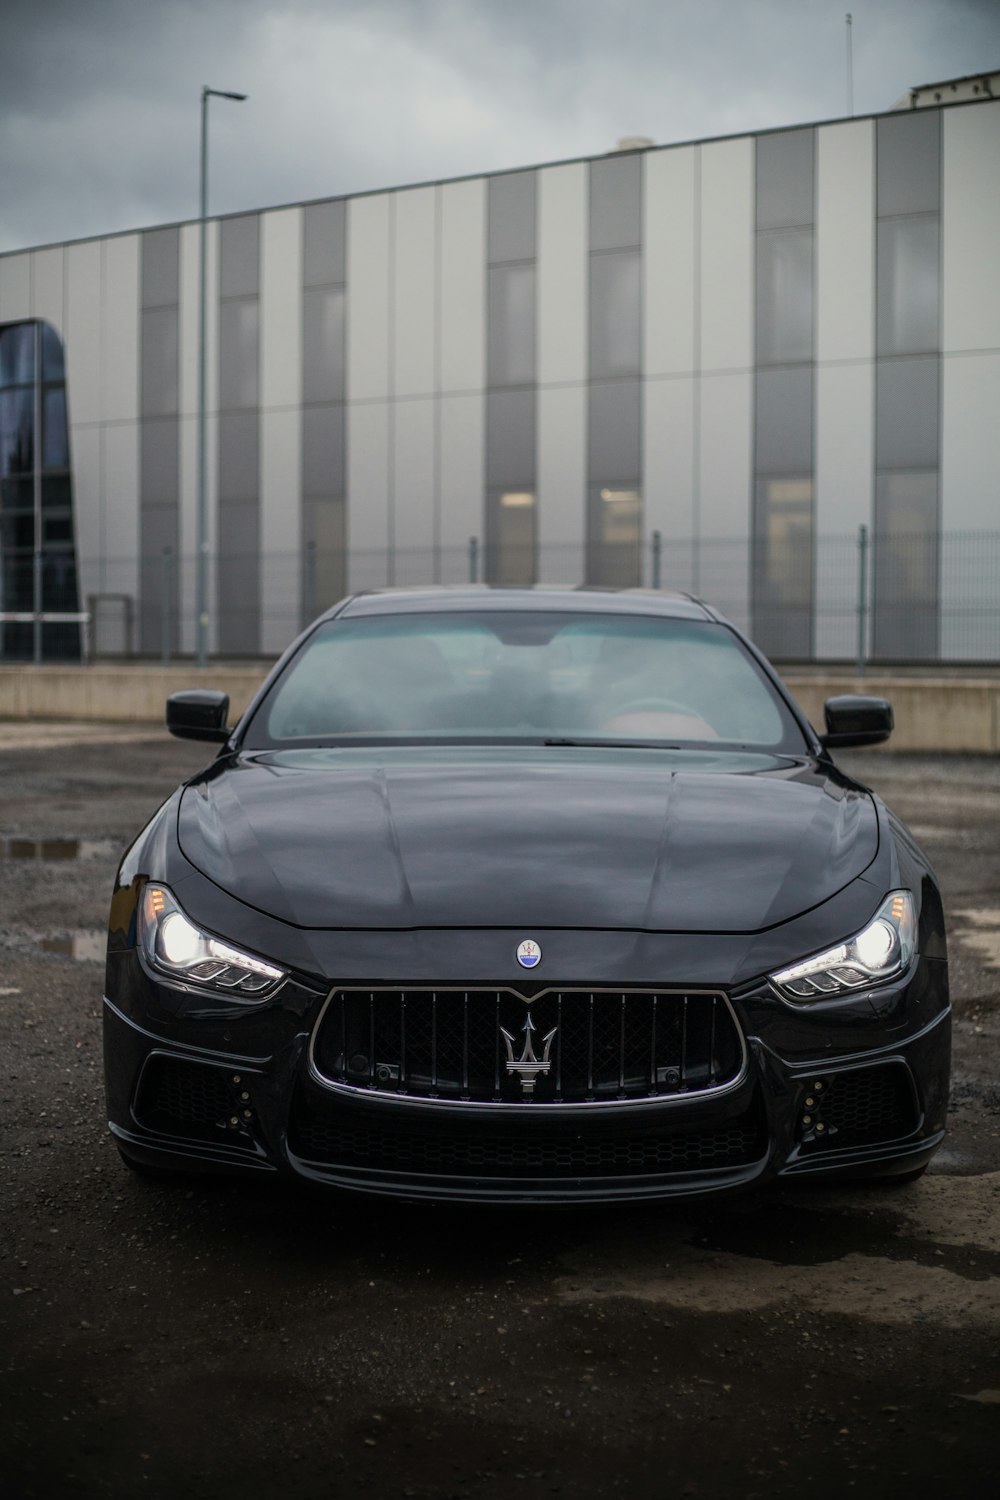 a black masera parked in front of a building